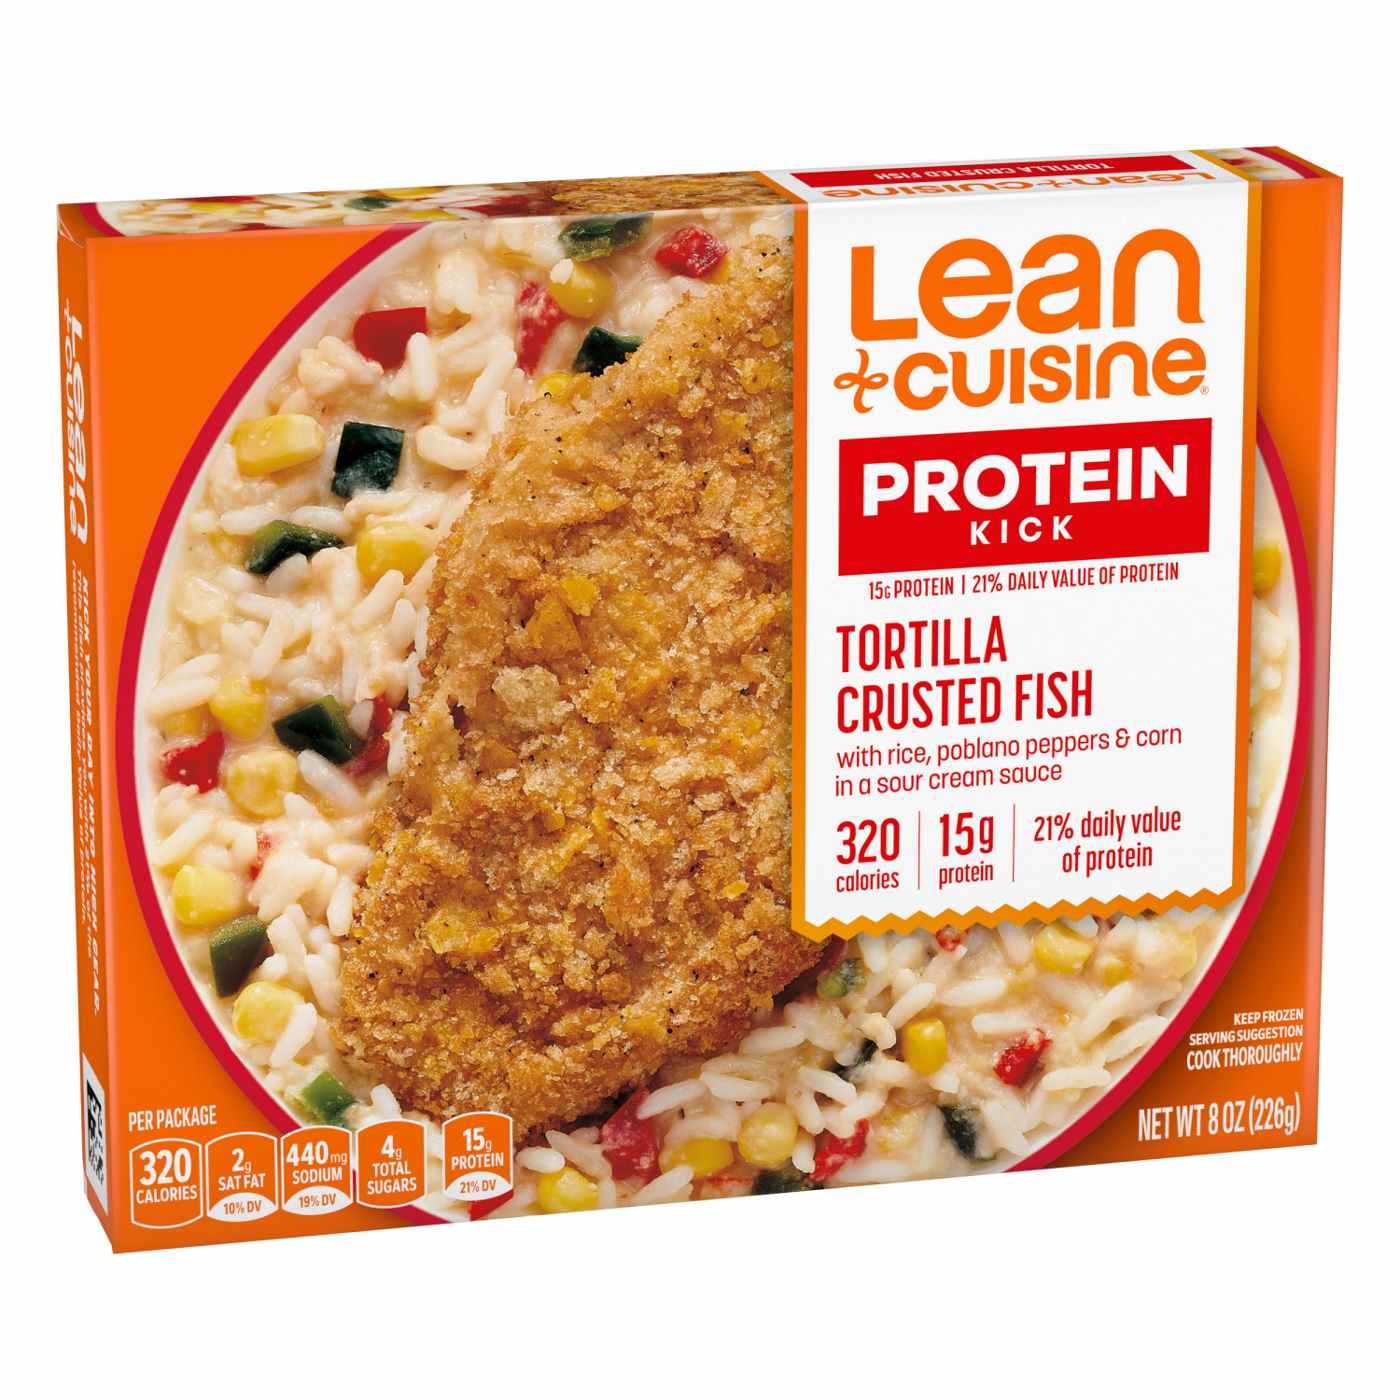 Lean Cuisine 15g Protein Tortilla Crusted Fish Frozen Meal; image 7 of 8